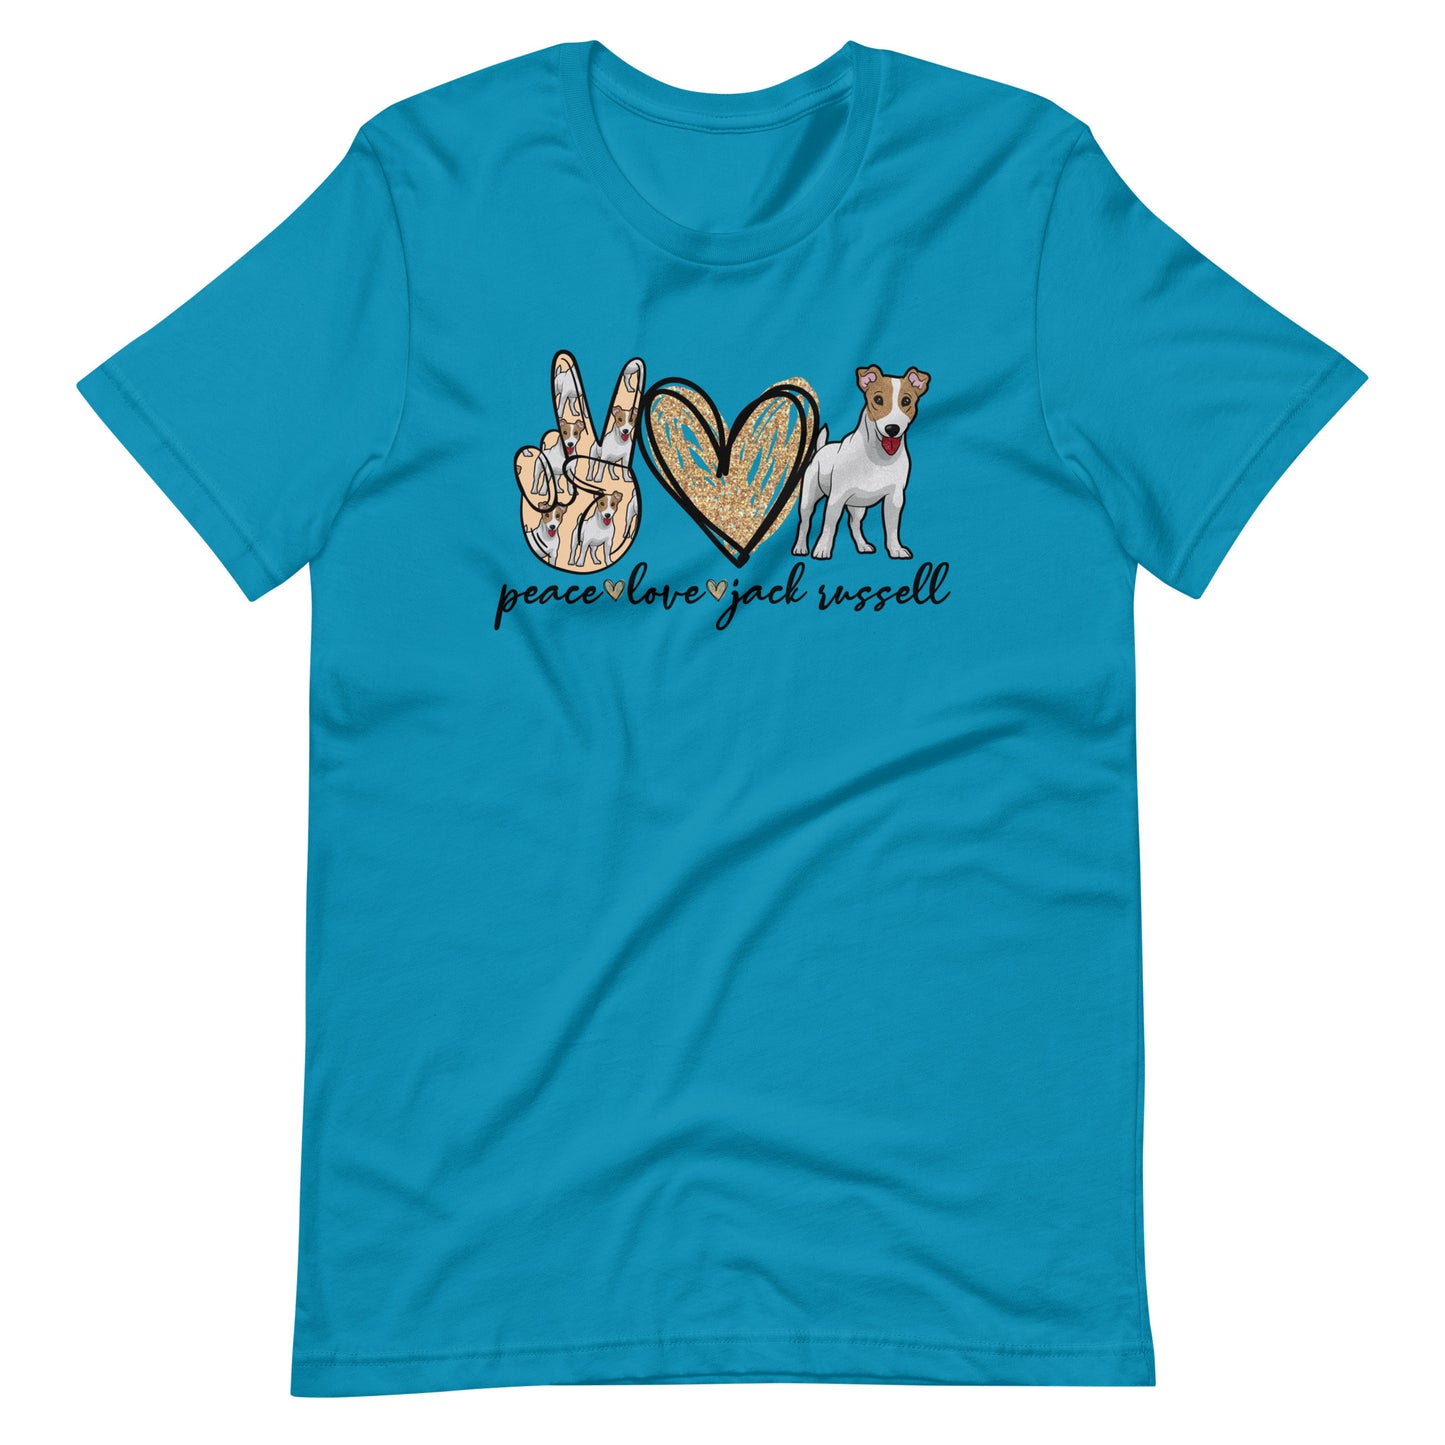 Peace Love Jack Russell Unisex t-shirt